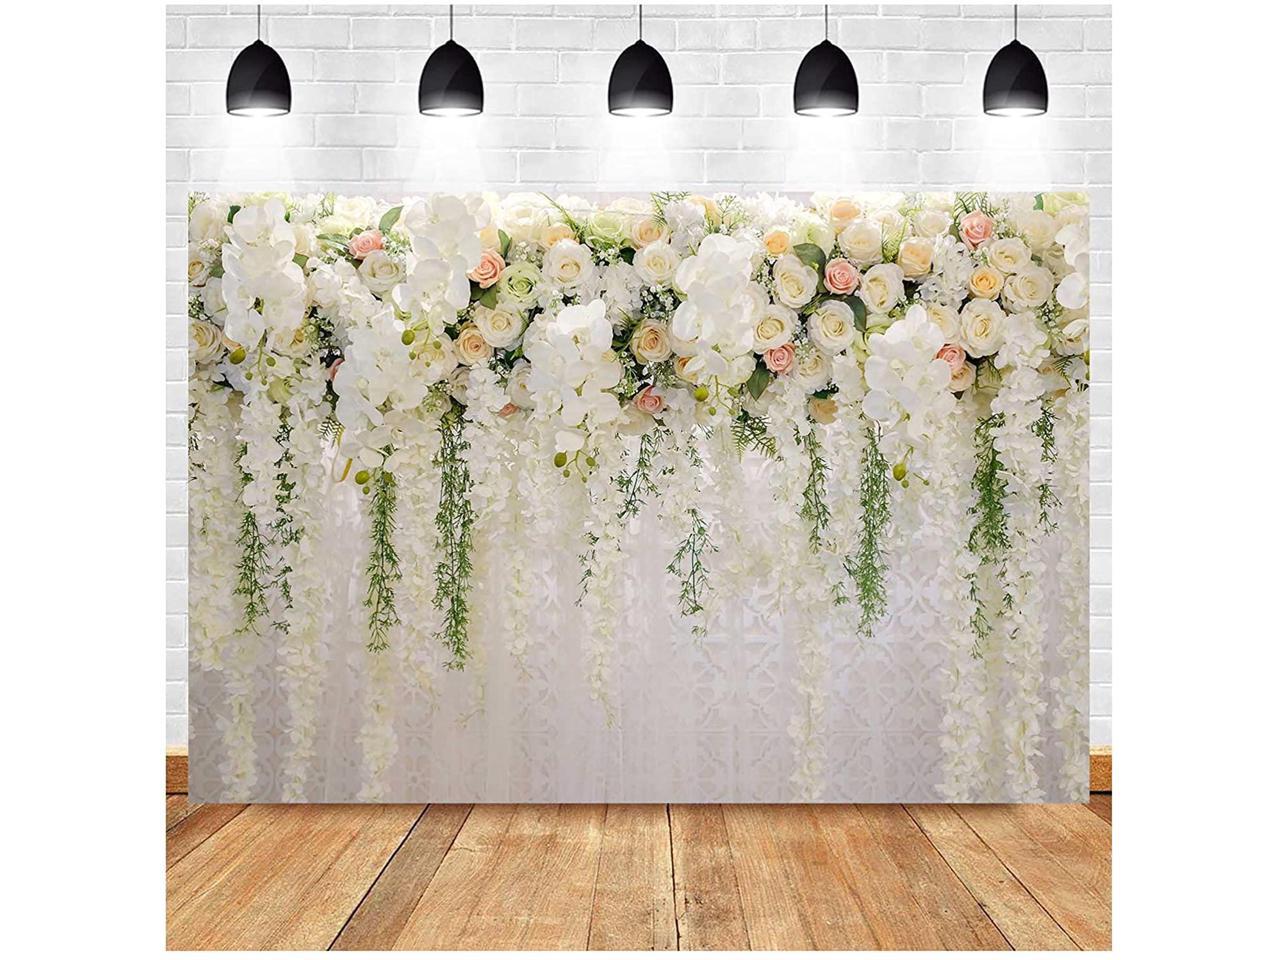 9x6ft Wedding Ceremoney Flowers Photography Background Blooming Floral on White Panel Anniversary Girls Tea Party Bridal Shower Decor Bride Groom Portrait Photo Shoot Photo Studio Props 